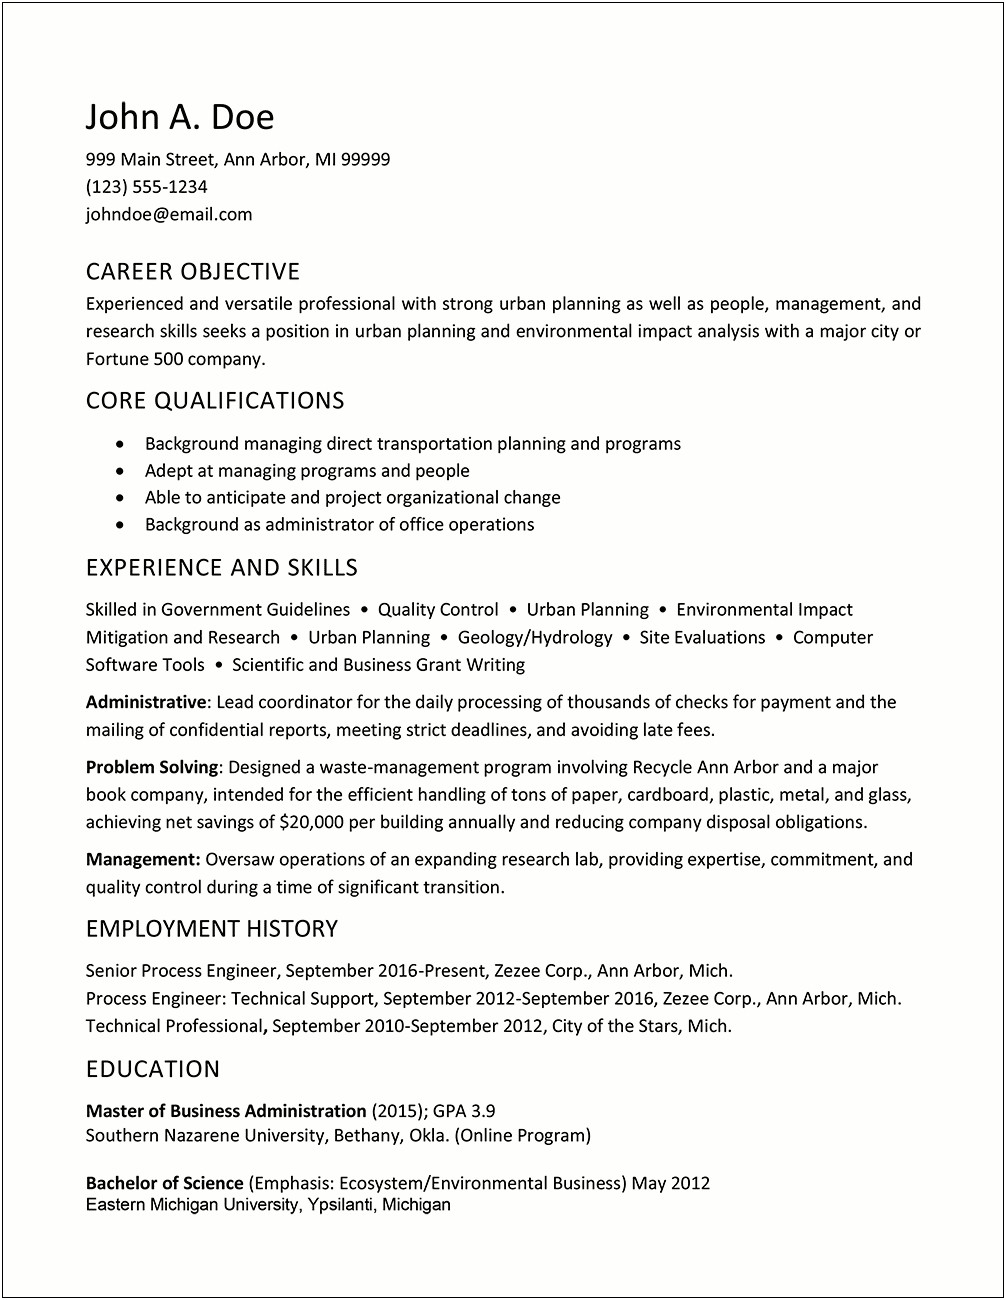 Common Criticism Of Using An Objective In Resume